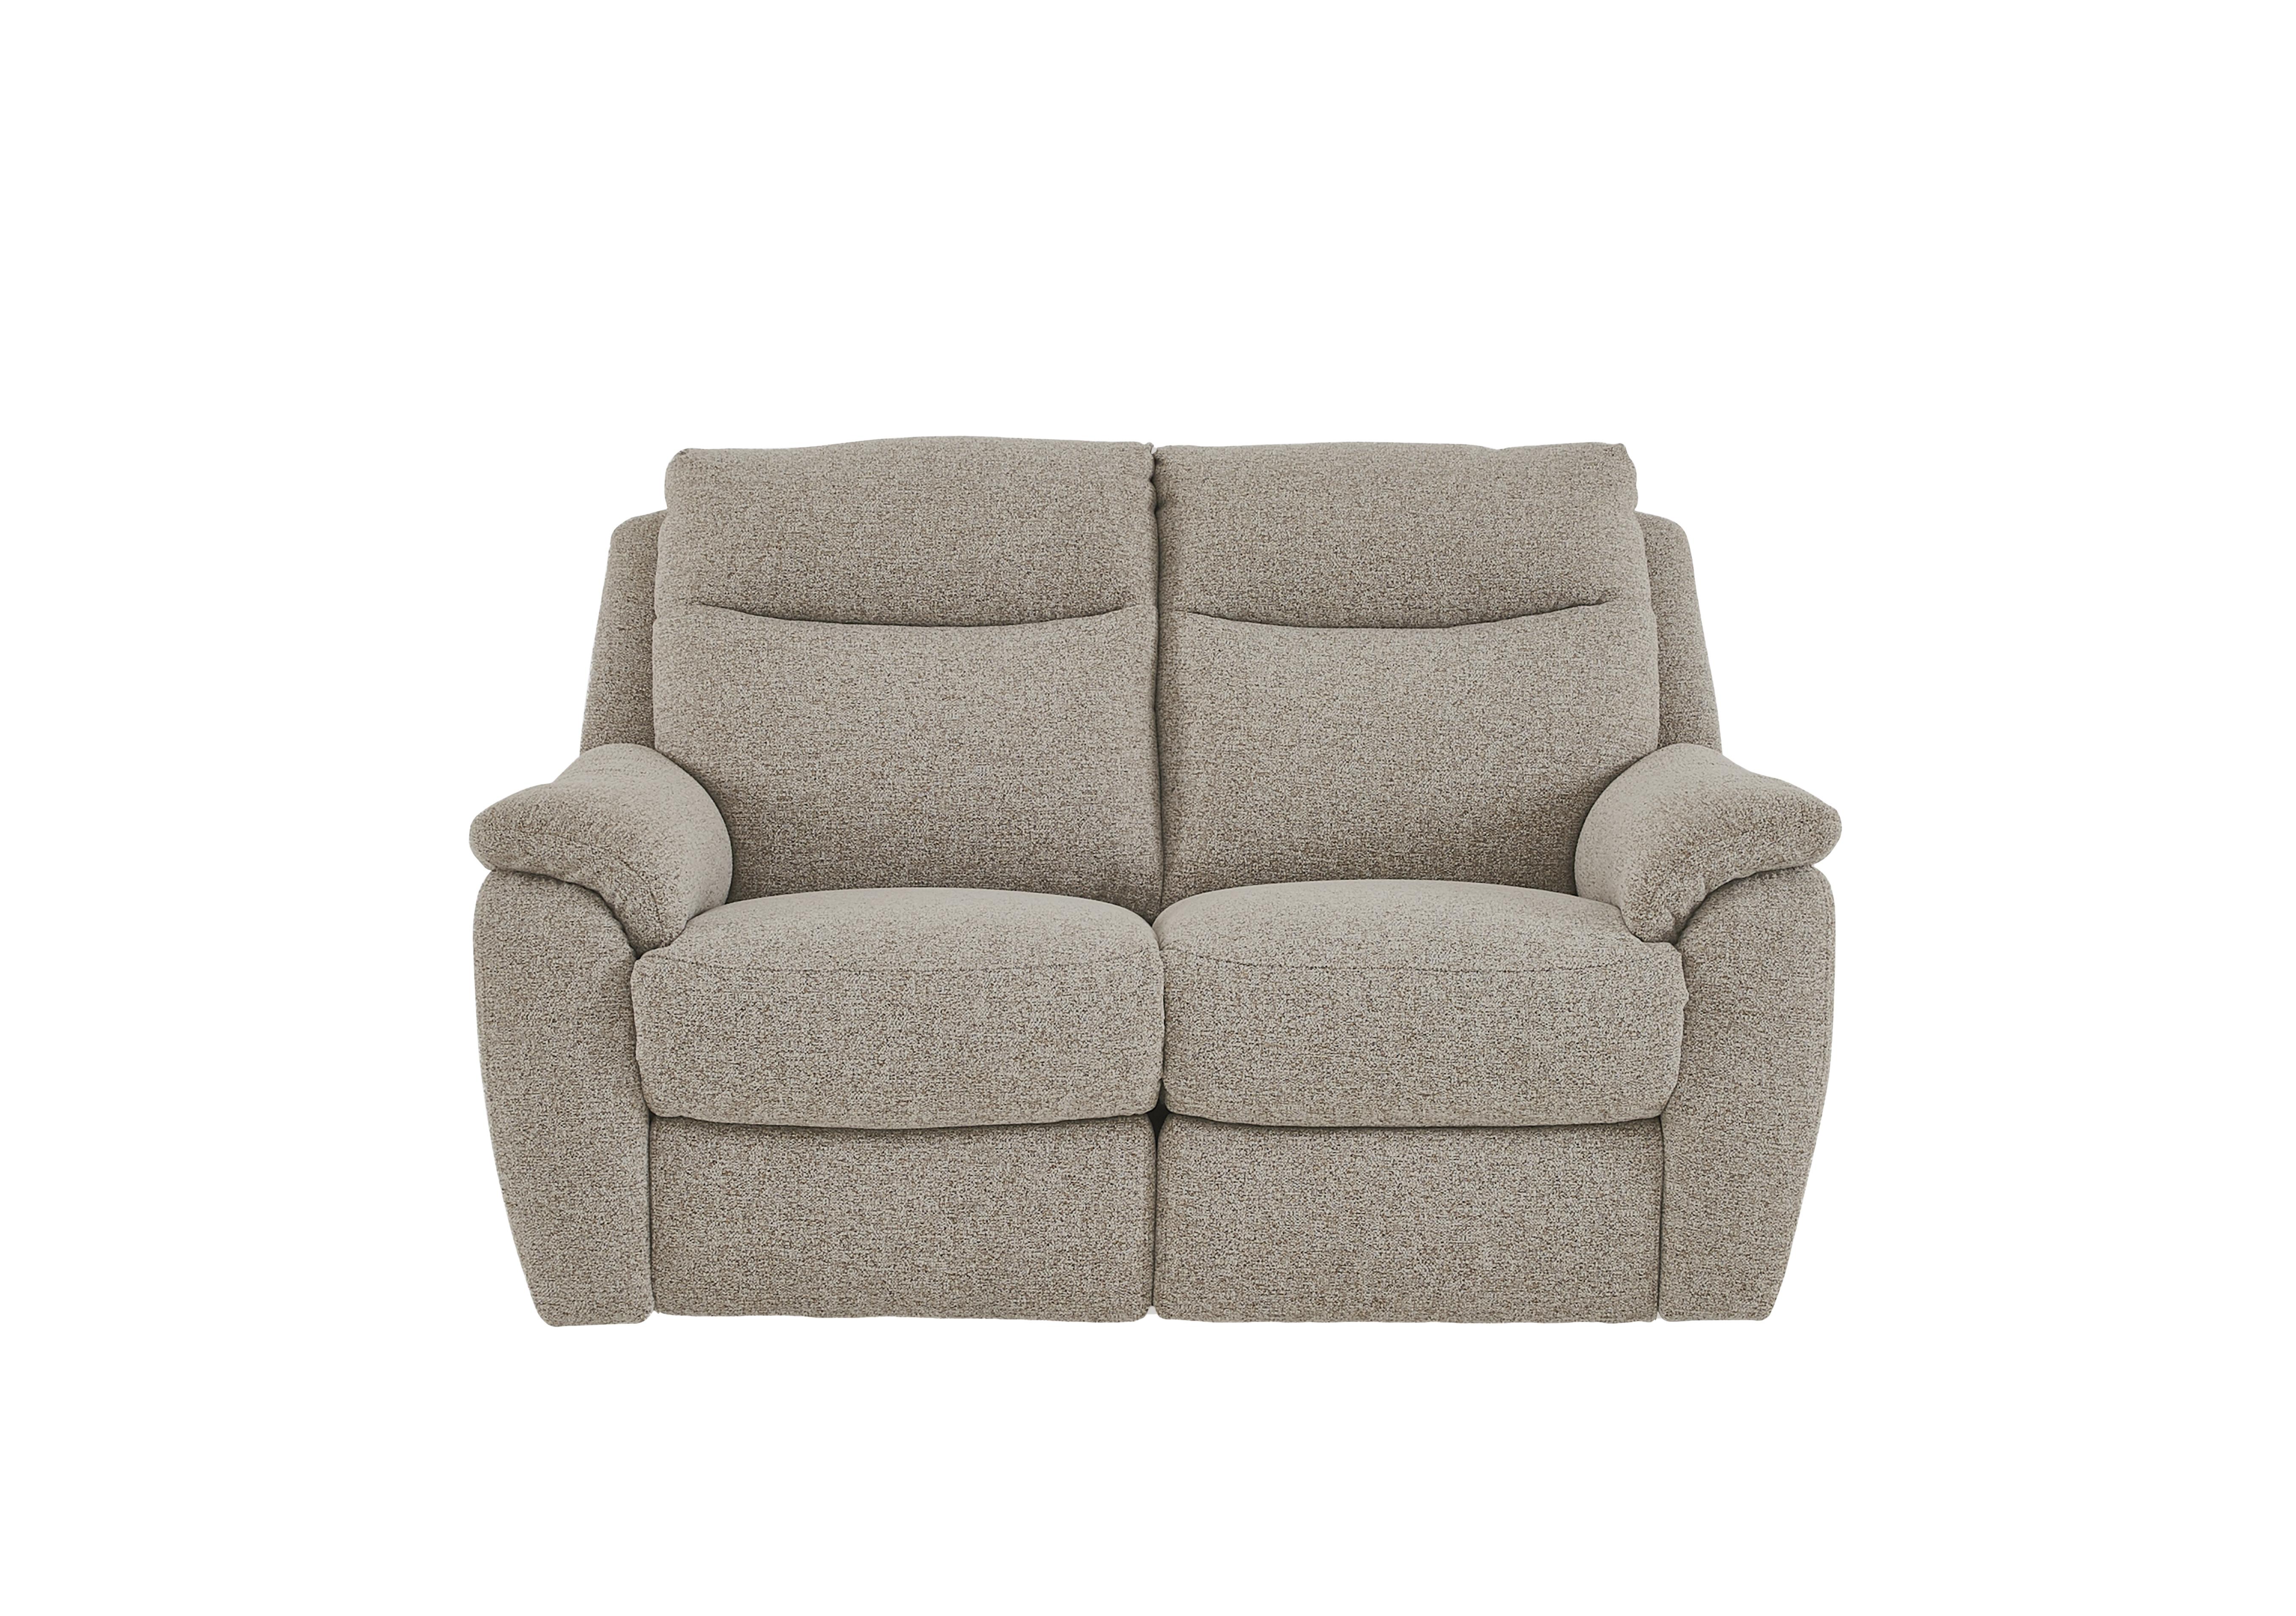 Snug 2 Seater Fabric Sofa in Fab-Chl-R25 Biscuit on Furniture Village